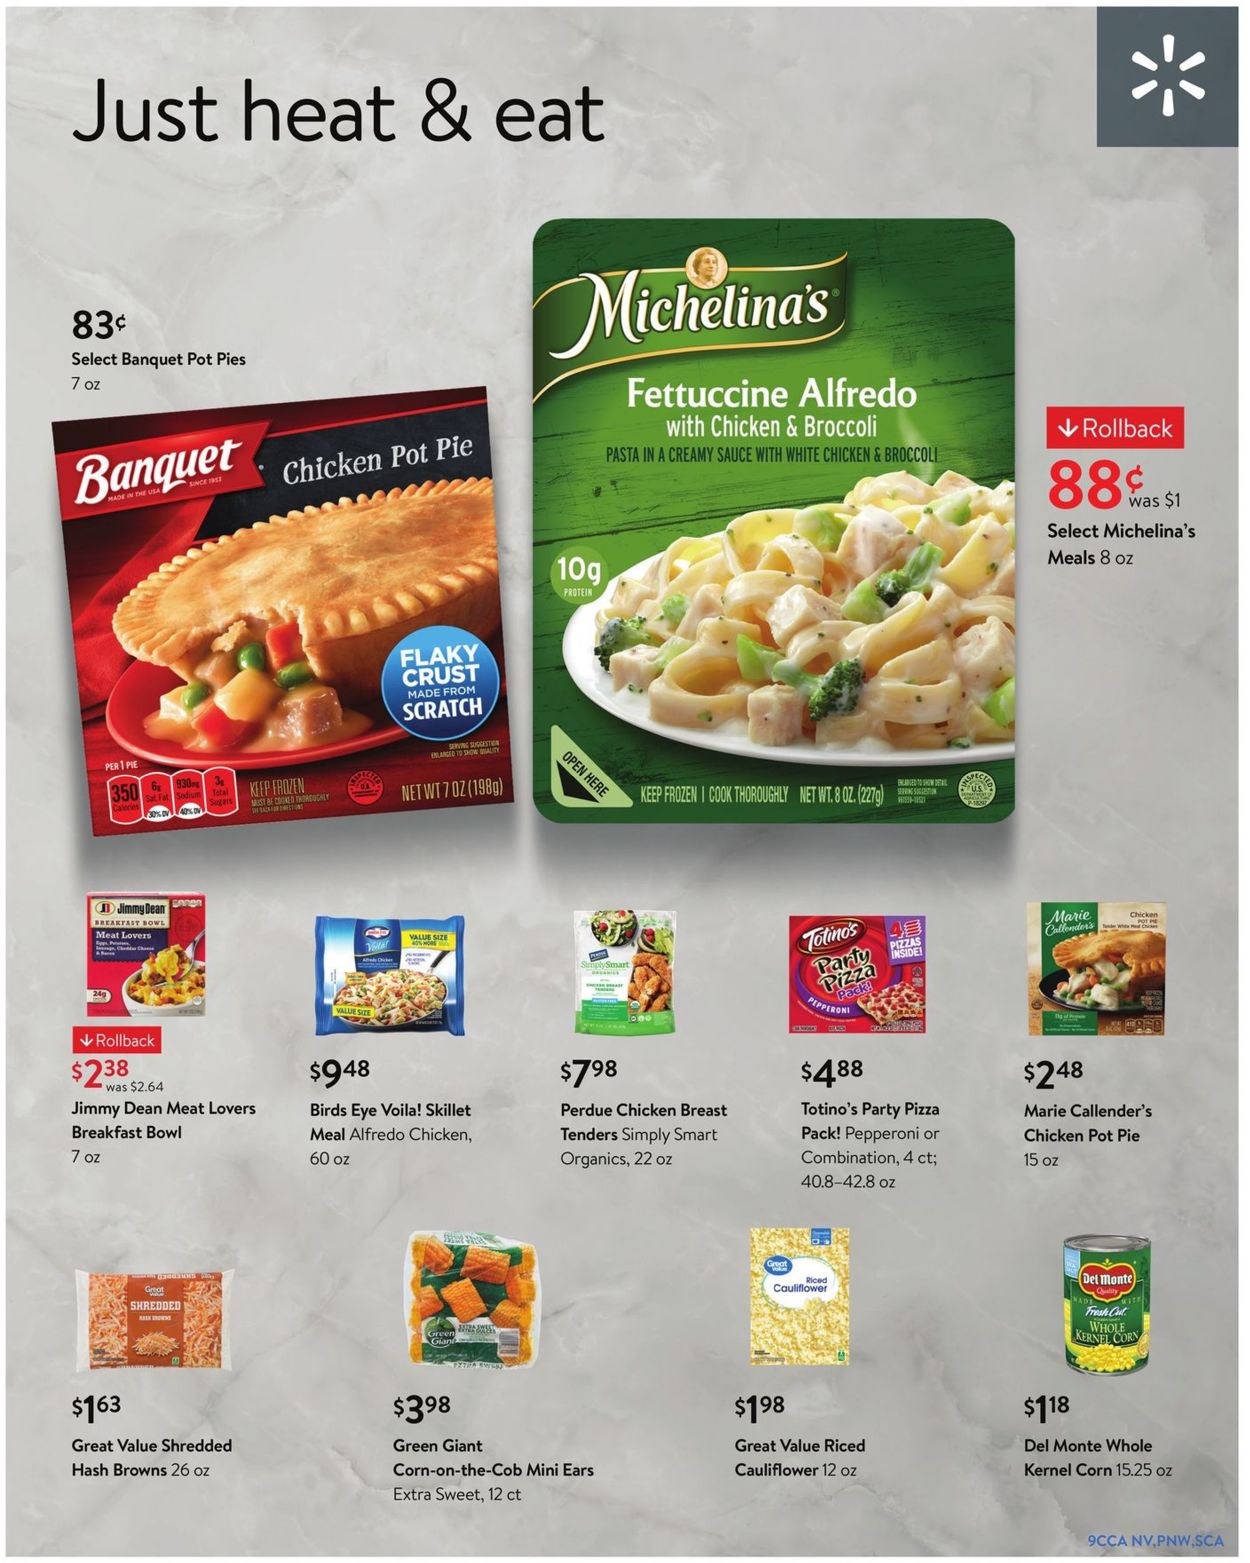 Walmart Current weekly ad 04/05 - 04/27/2021 [9] - frequent-ads.com